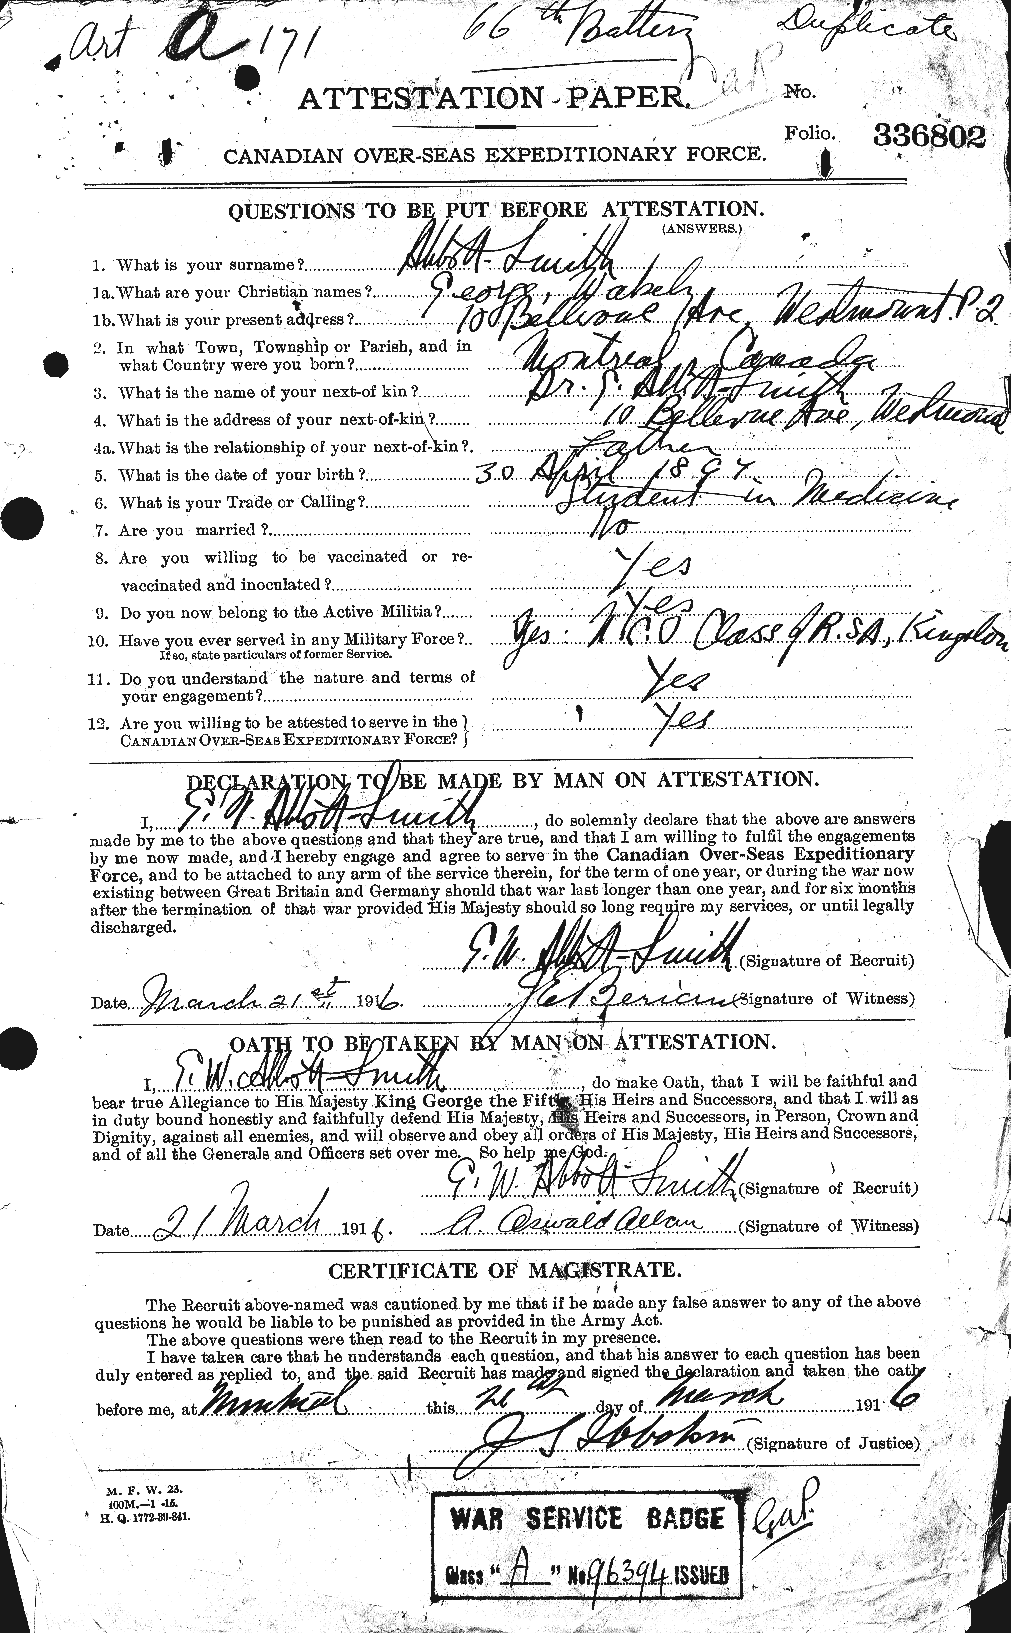 Personnel Records of the First World War - CEF 200945a